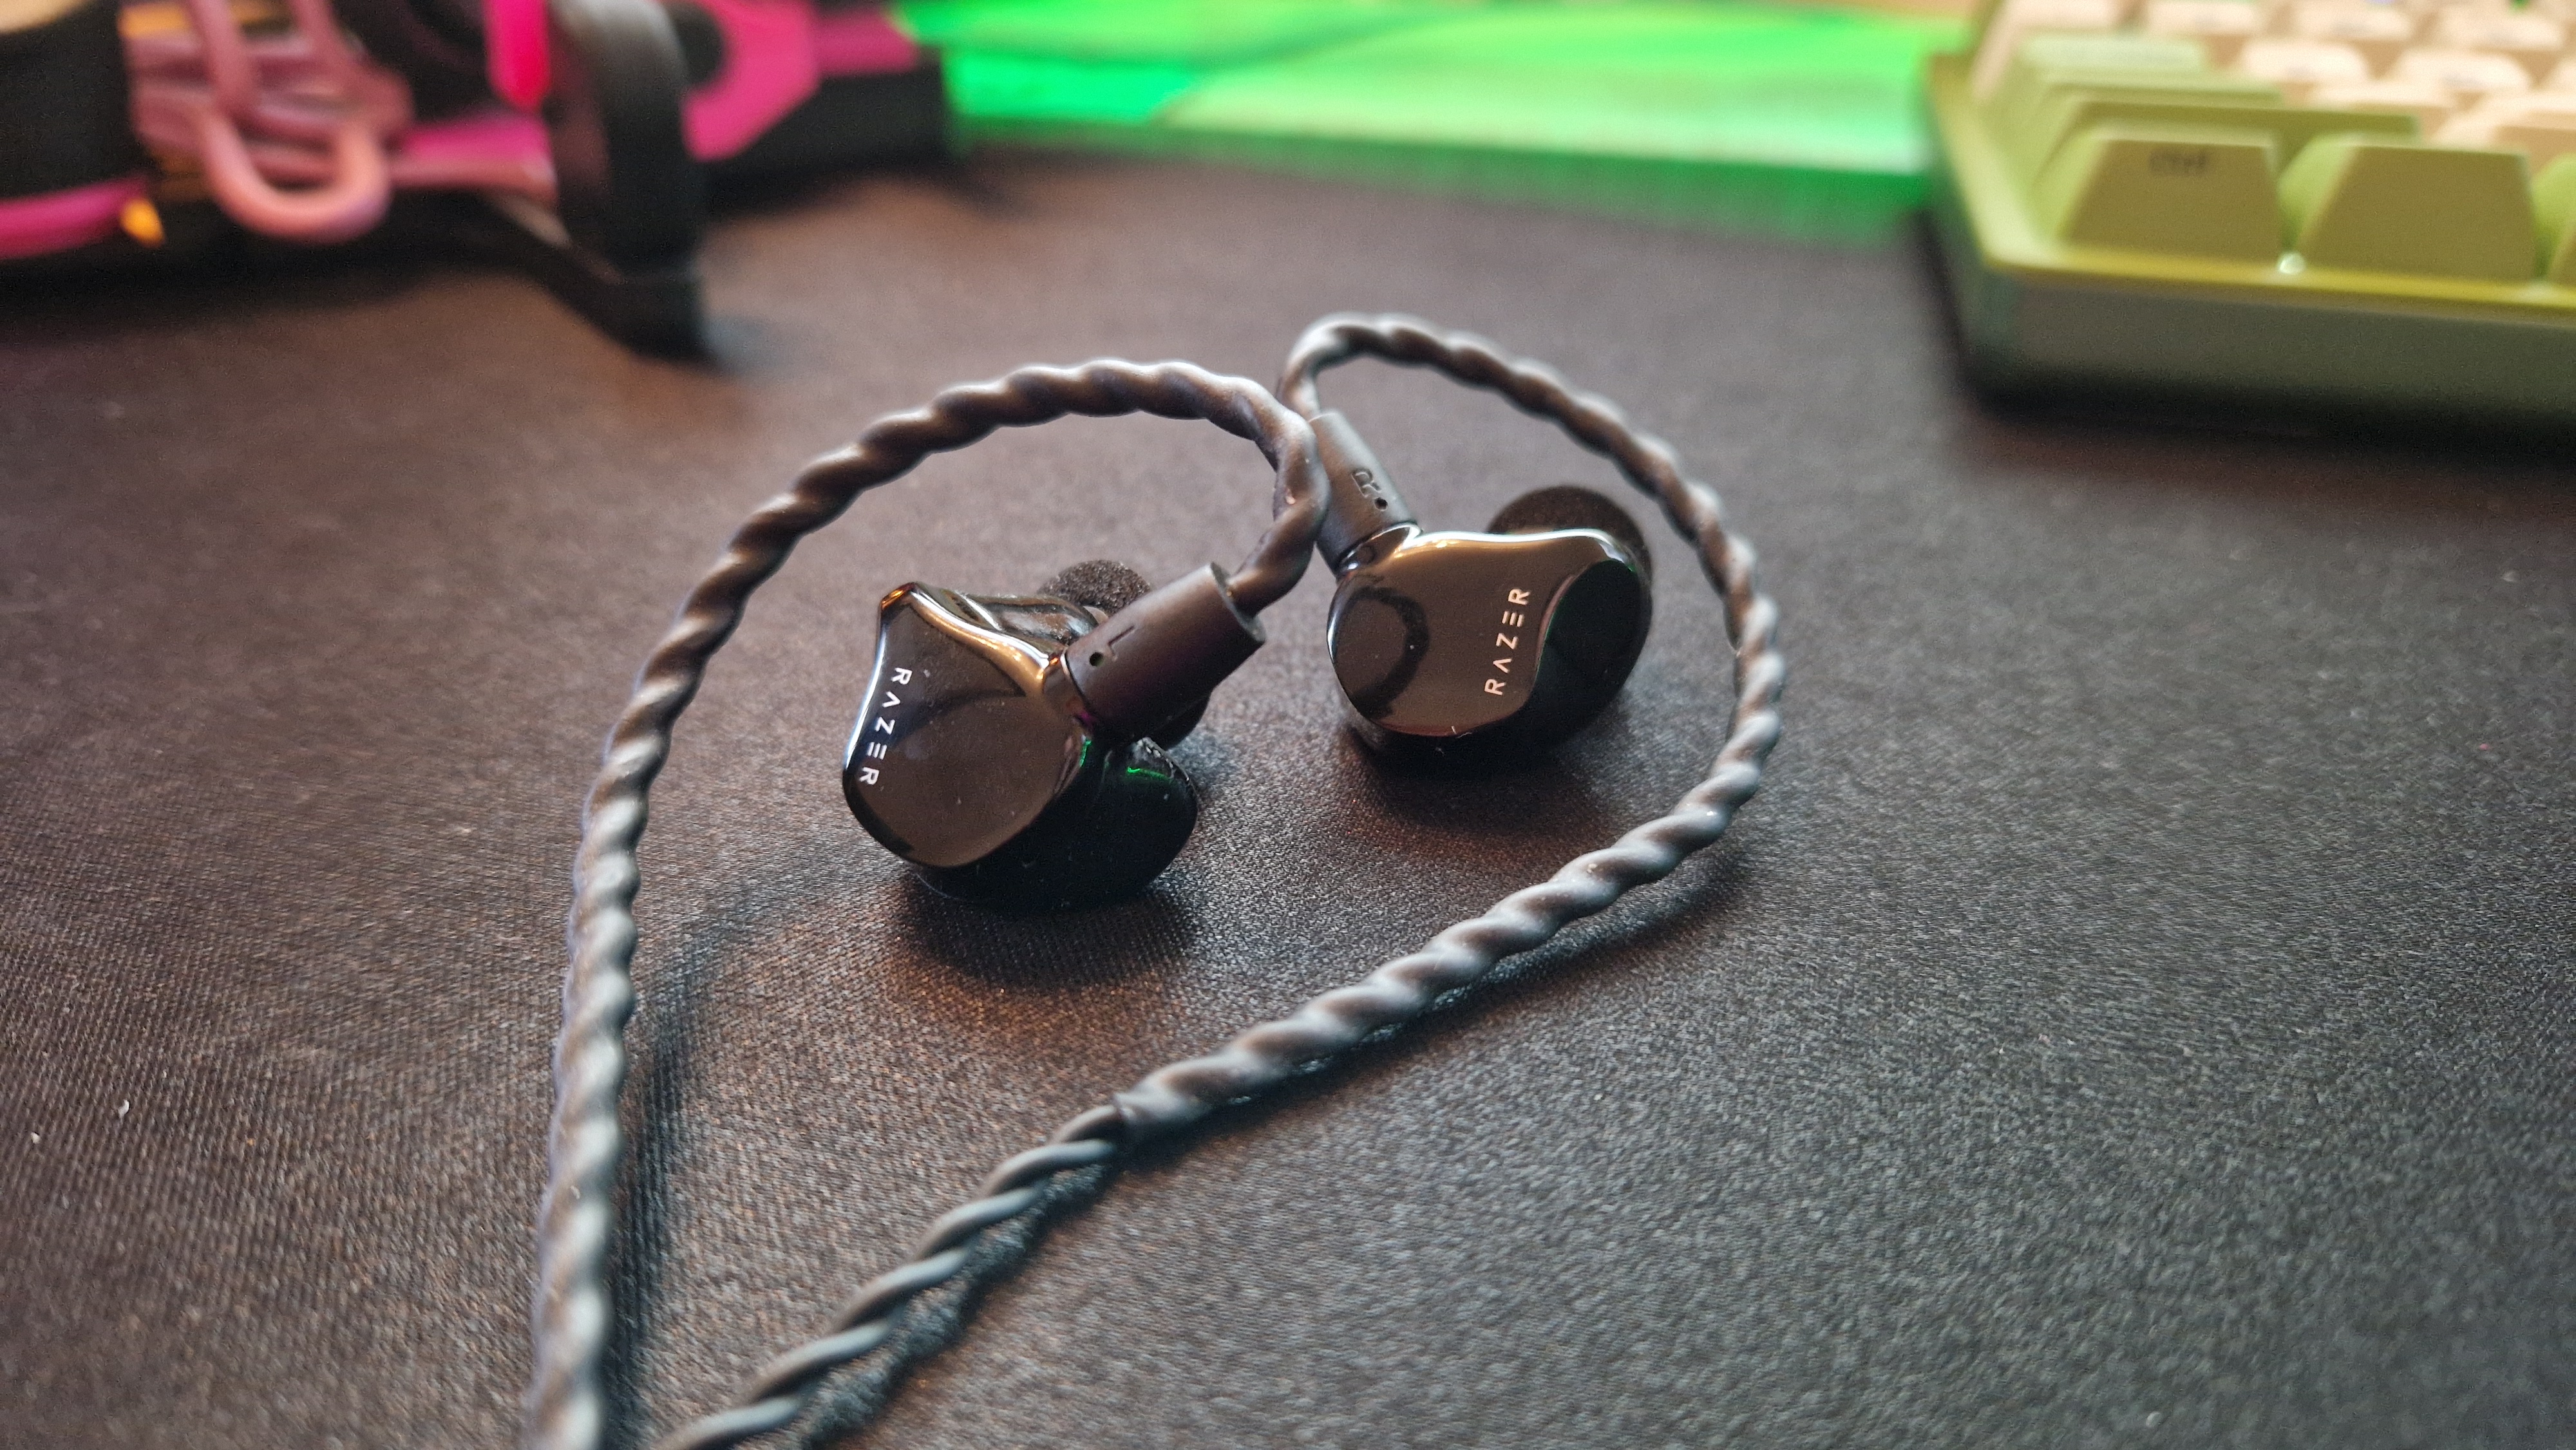 Razer Moray review image of the in-ear monitors lying on a black desk mat